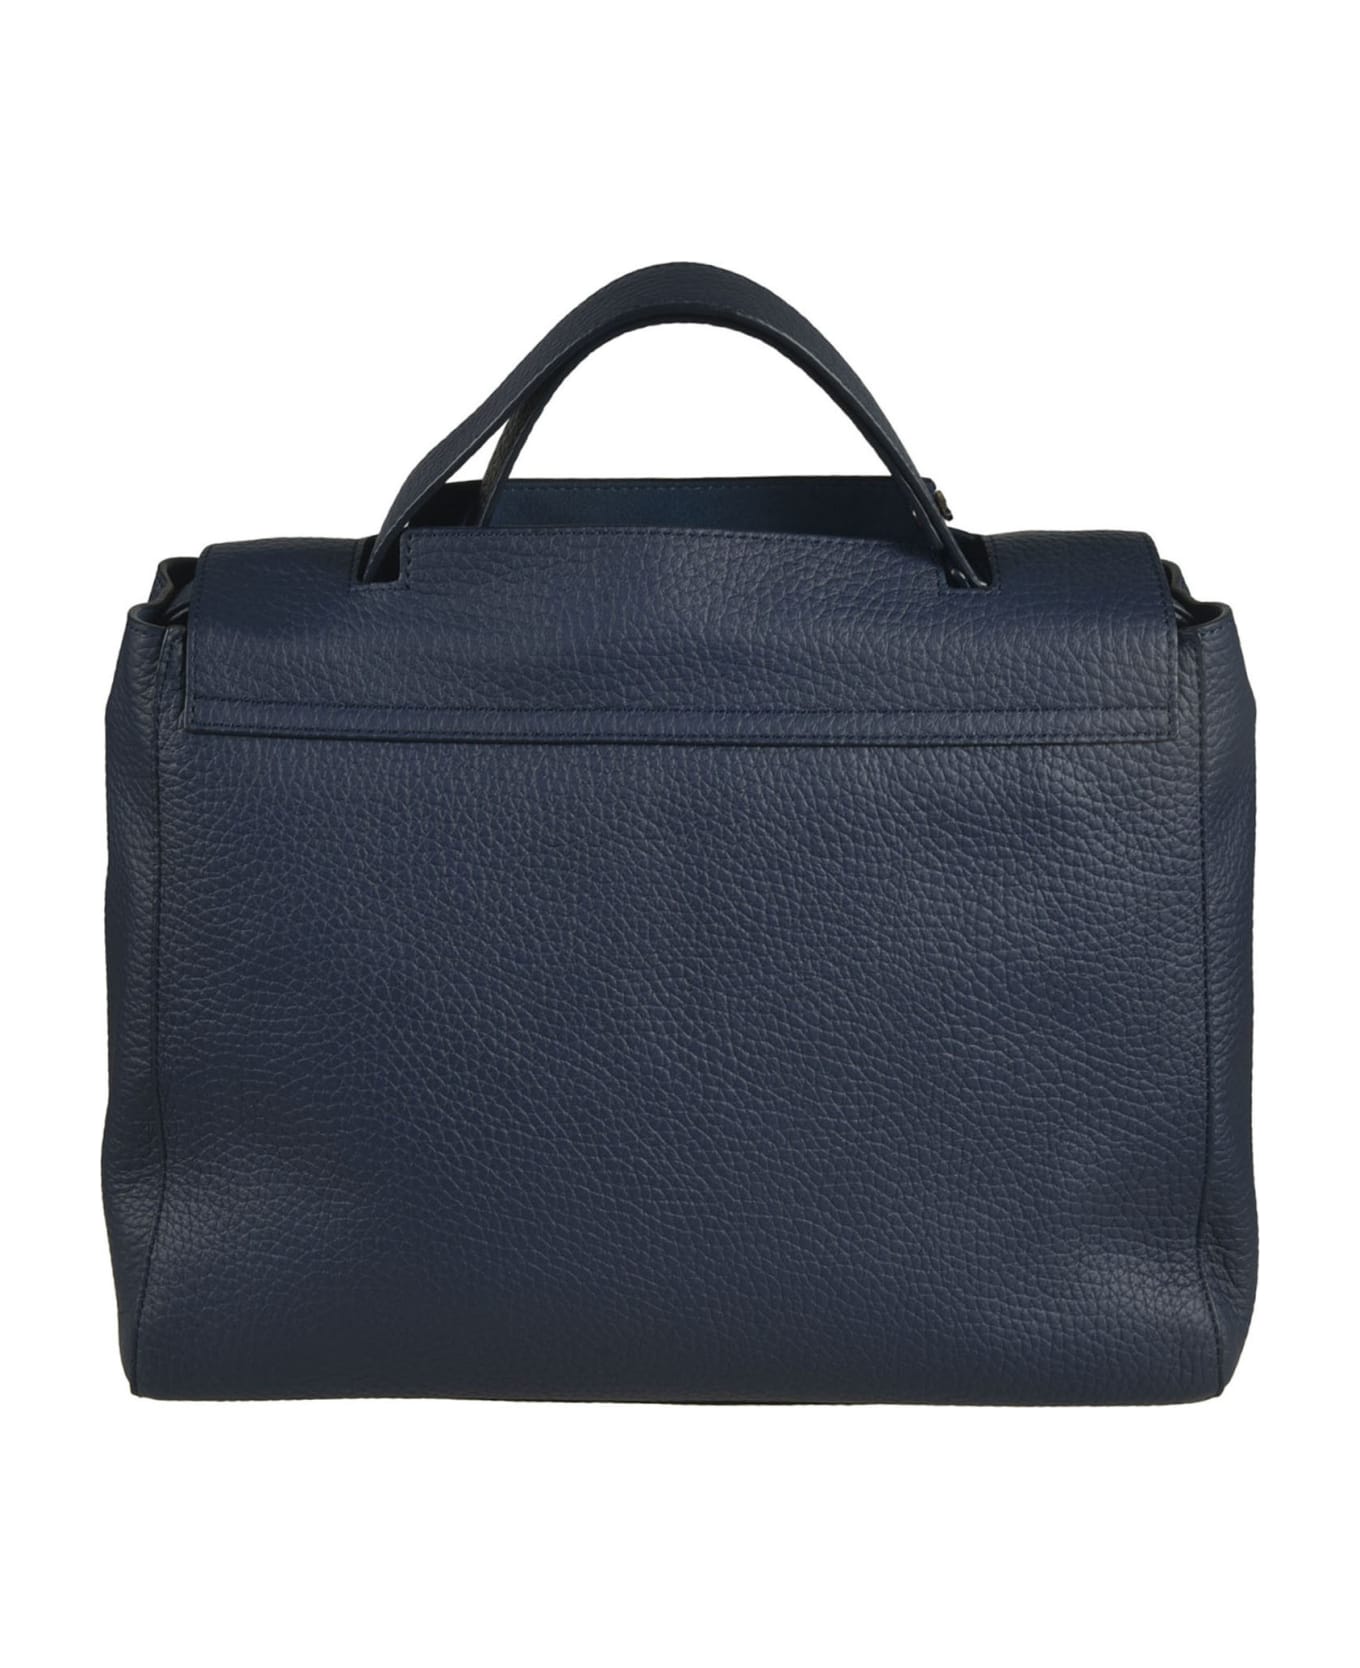 Orciani Logo Flap Tote - Navy